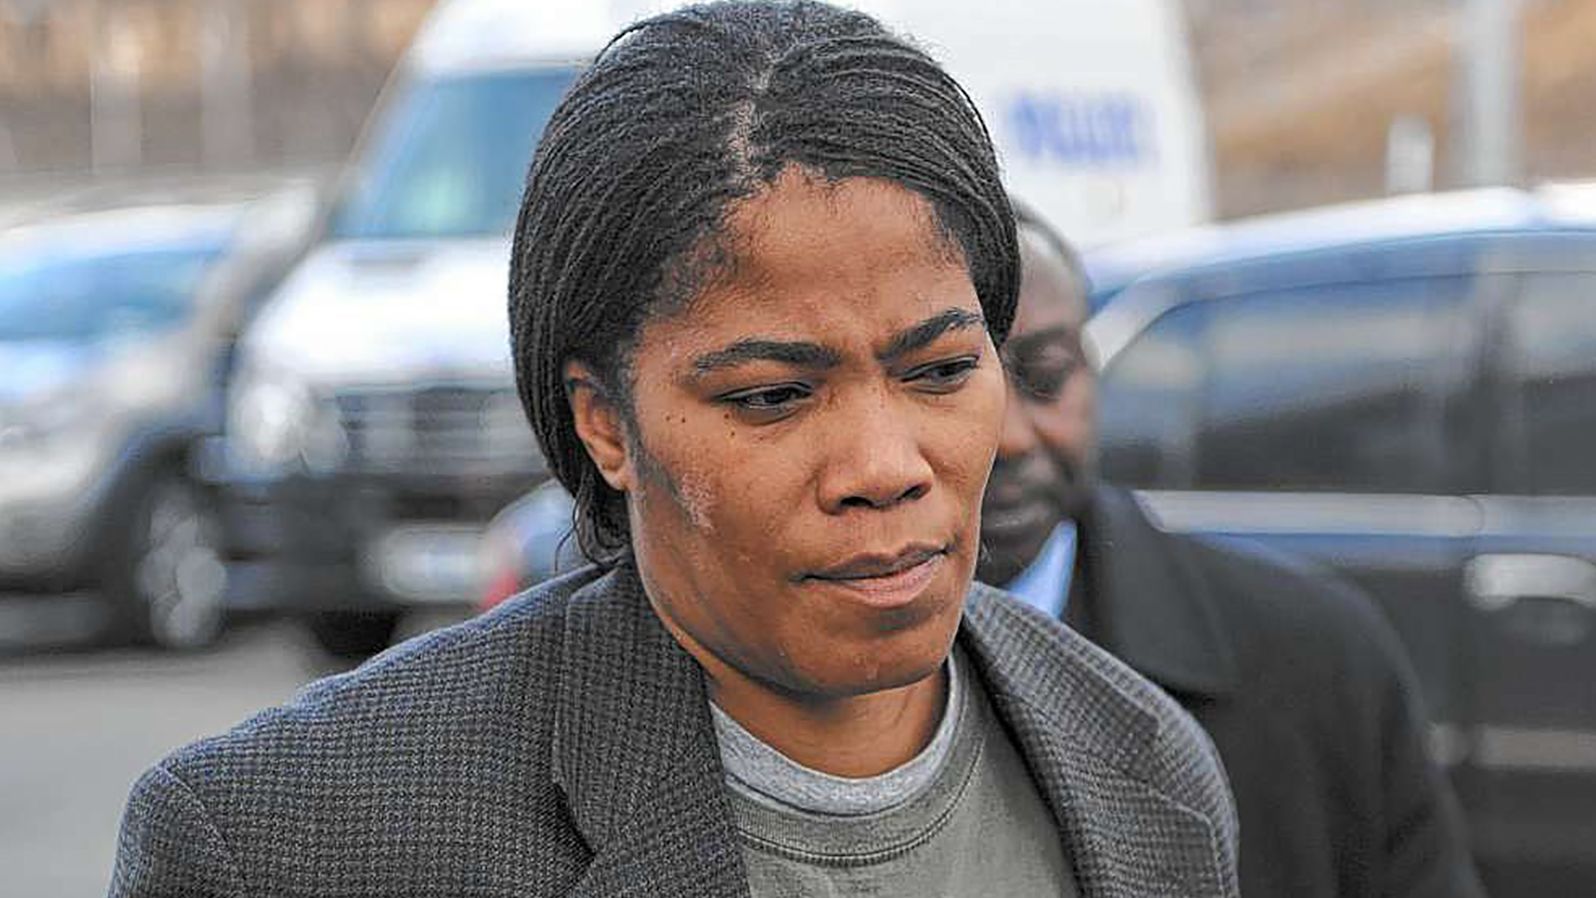 Police said the death of Malcolm X's daughter, Malikah Shabazz, appeared to be due to natural causes. 